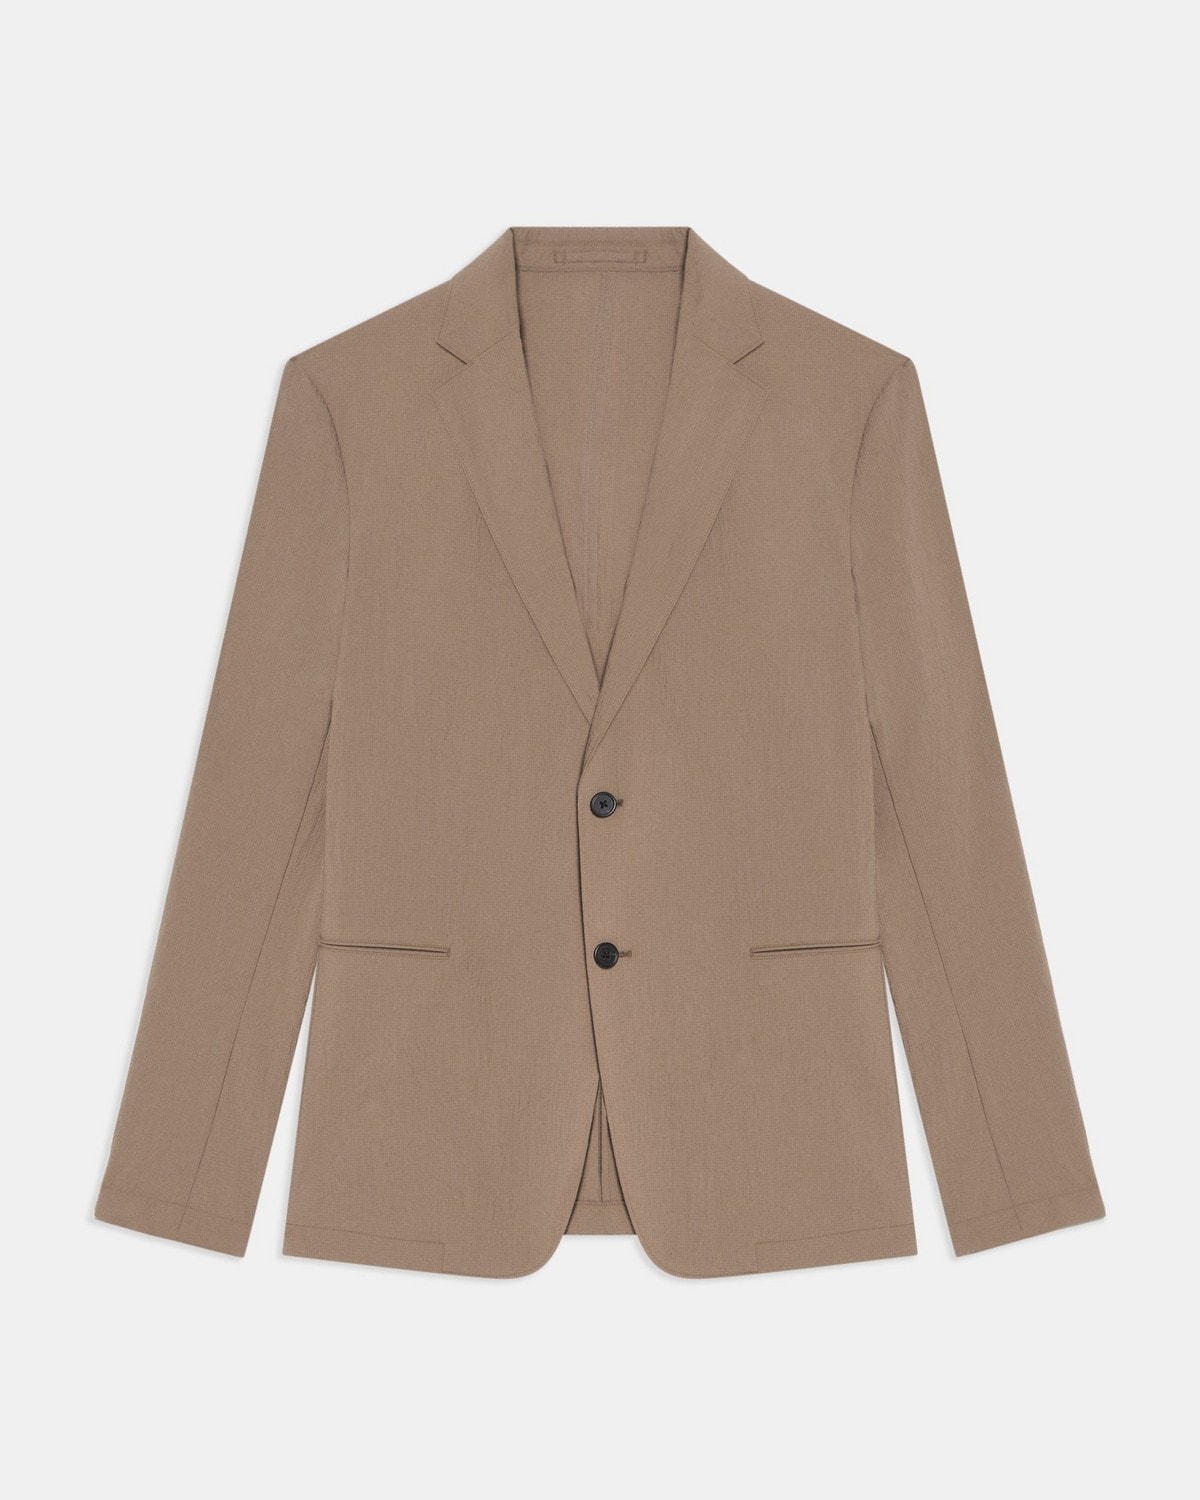 Unstructured Suit Jacket in Nylon Blend